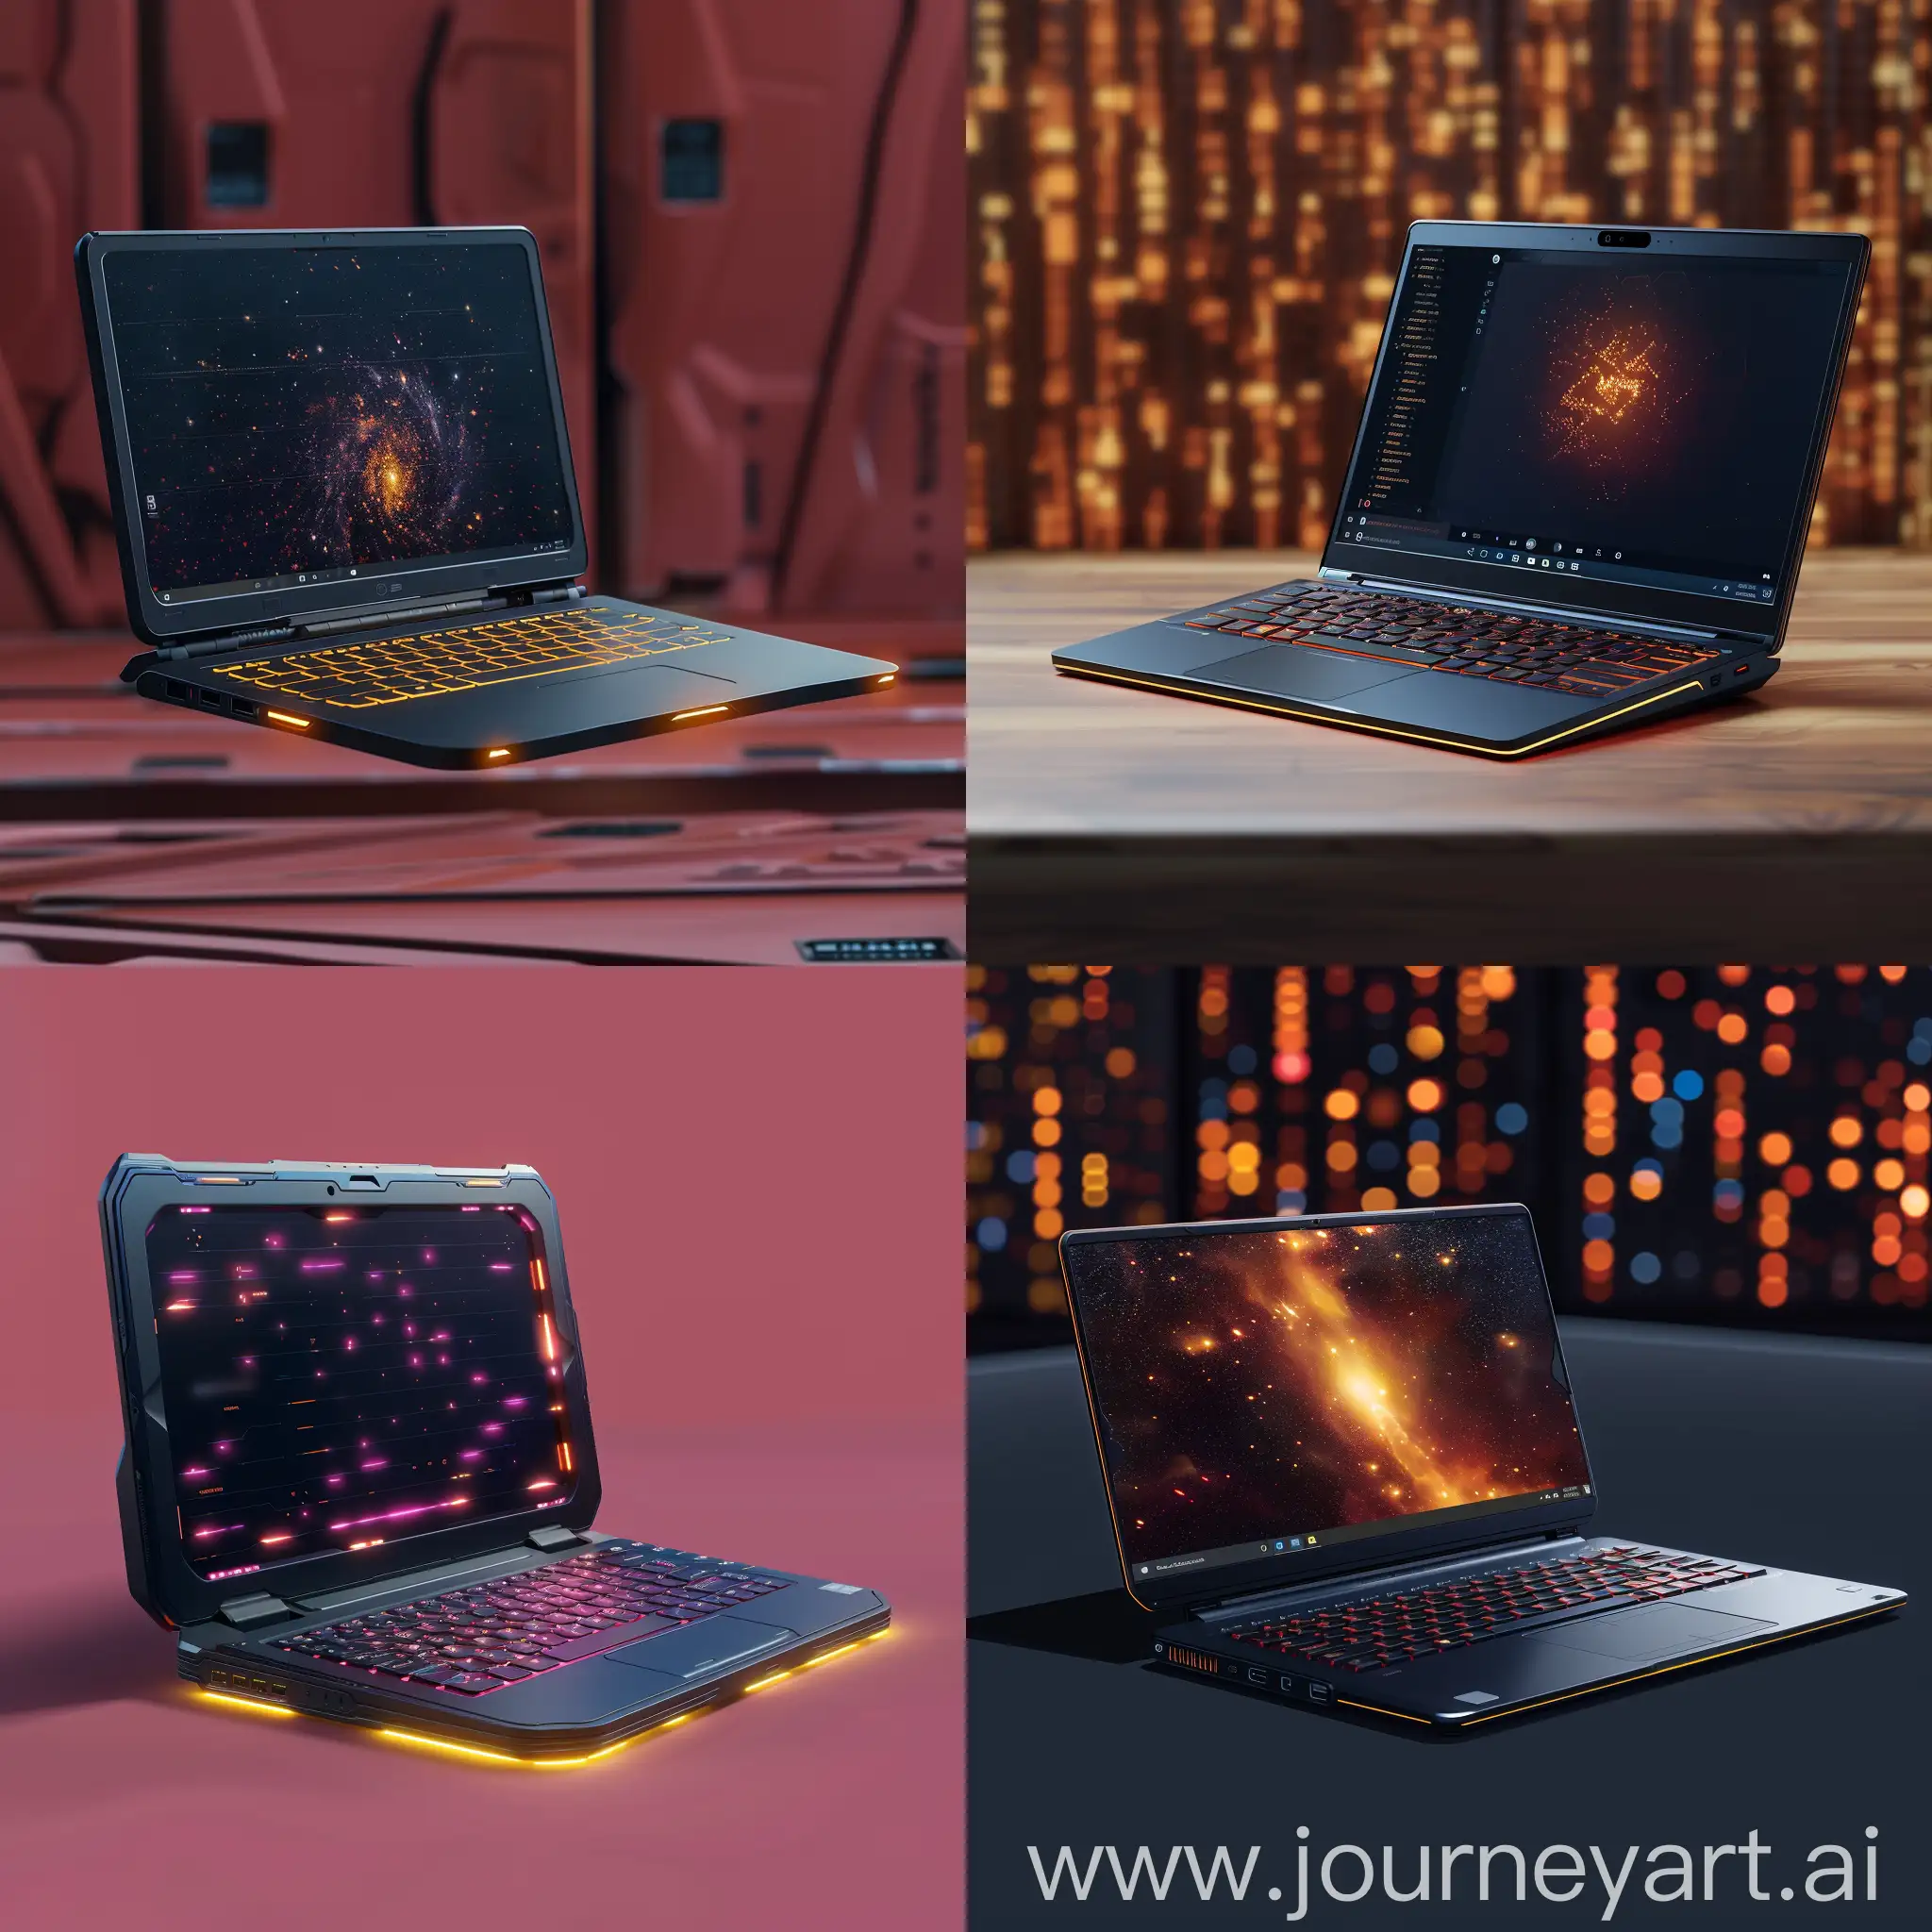 Futuristic laptop https://media.wired.com/photos/64daad6b4a854832b16fd3bc/master/pass/How-to-Choose-a-Laptop-August-2023-Gear.jpg:: Holographic Display, AI Assistance, Flexible or Foldable Screen, Biometric Security, Wireless Charging, Augmented Reality Integration, Self-Healing Materials, Voice and Gesture Control, Ultra-Fast Connectivity, Modular Design, Ruggedized Exterior, Shockproof SSD, Reinforced Corners, Rubberized Bumpers, Rubberized Bumpers, Spill-Resistant Keyboard, Anti-Shock Mounts, Sealed Ports, Gorilla Glass Display, Drop Protection Technology, MIL-STD-810G Certification, Aerospace-Grade Materials, Reinforced Hinges, Impact-Resistant Display, Water-Resistant Seals, Vibration Dampening, Heat Dissipation System, Secure Locking Mechanisms, Tamper-Proof Design, Reinforced Cables, Impact-Resistant Bumpers, octane render --stylize 1000